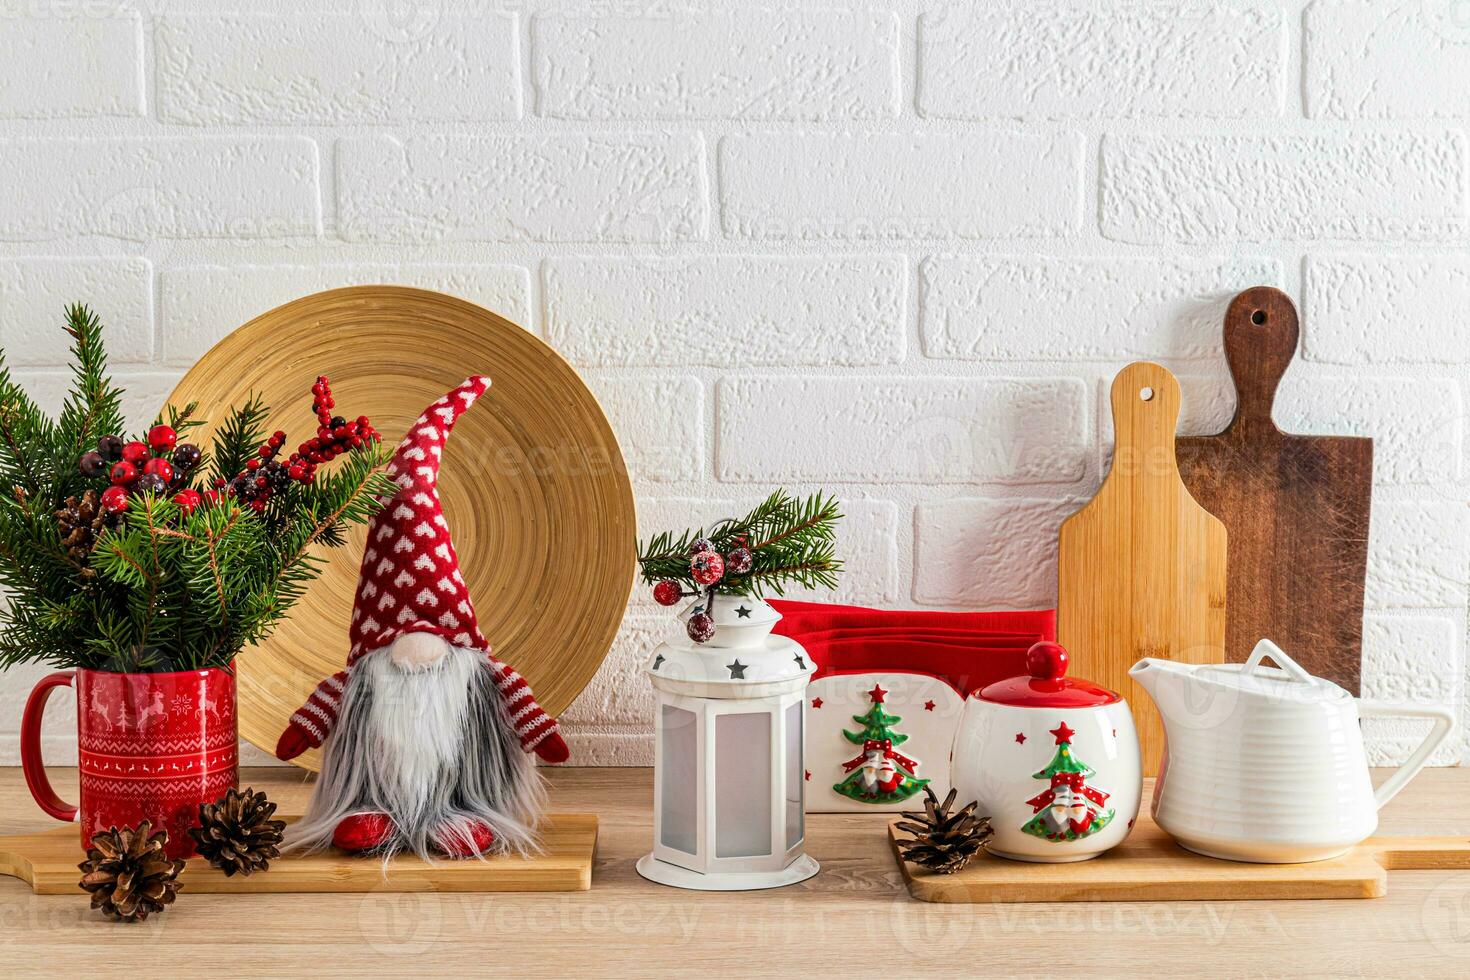 Chic kitchen background decorated with New Year's items, toys, dishes. White brick wall. Wooden countertop. Eco-friendly kitchen photo